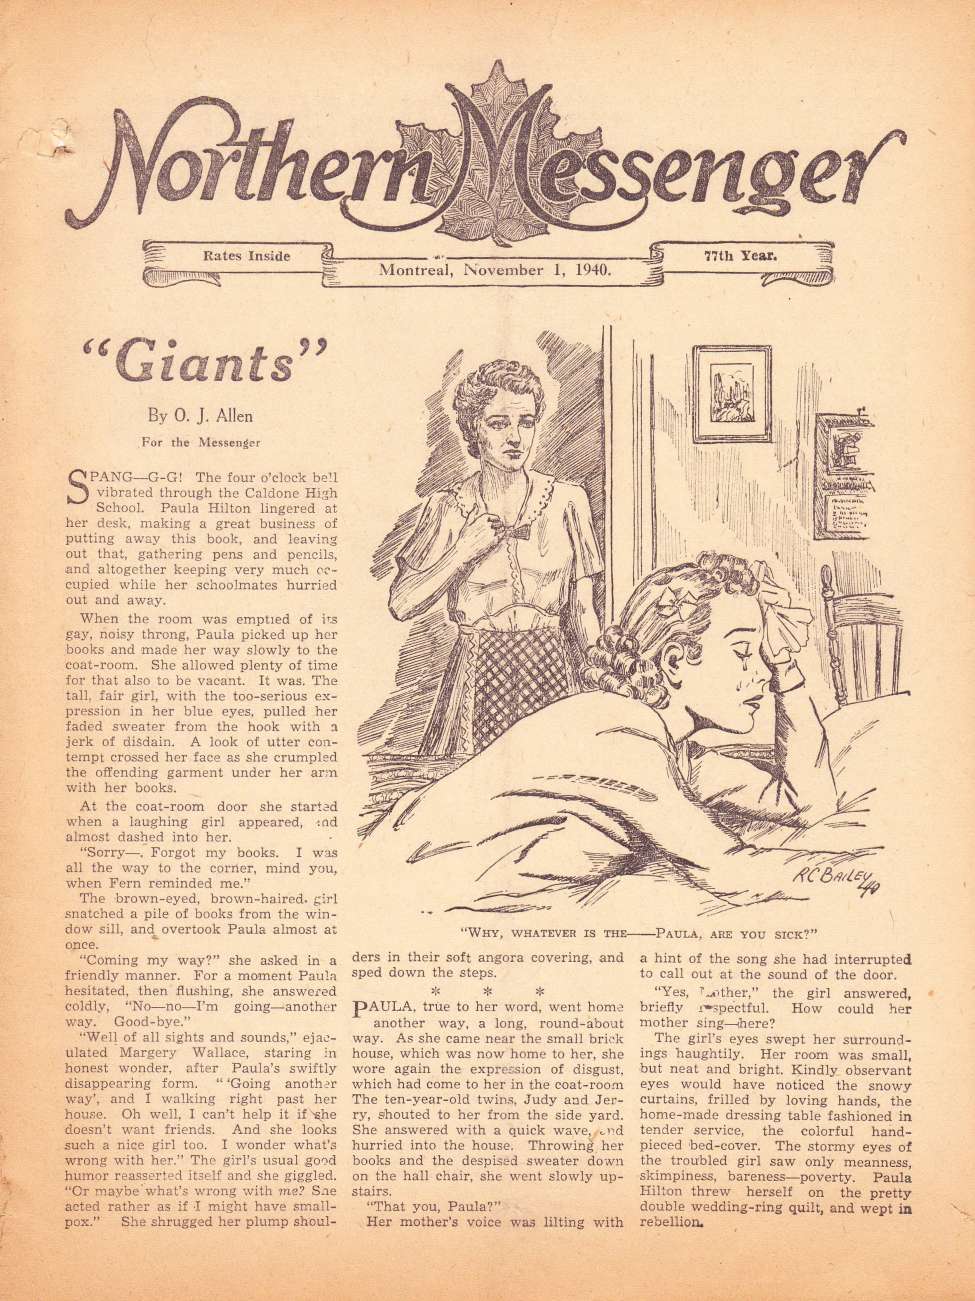 Comic Book Cover For Northern Messenger (1940-11-01)